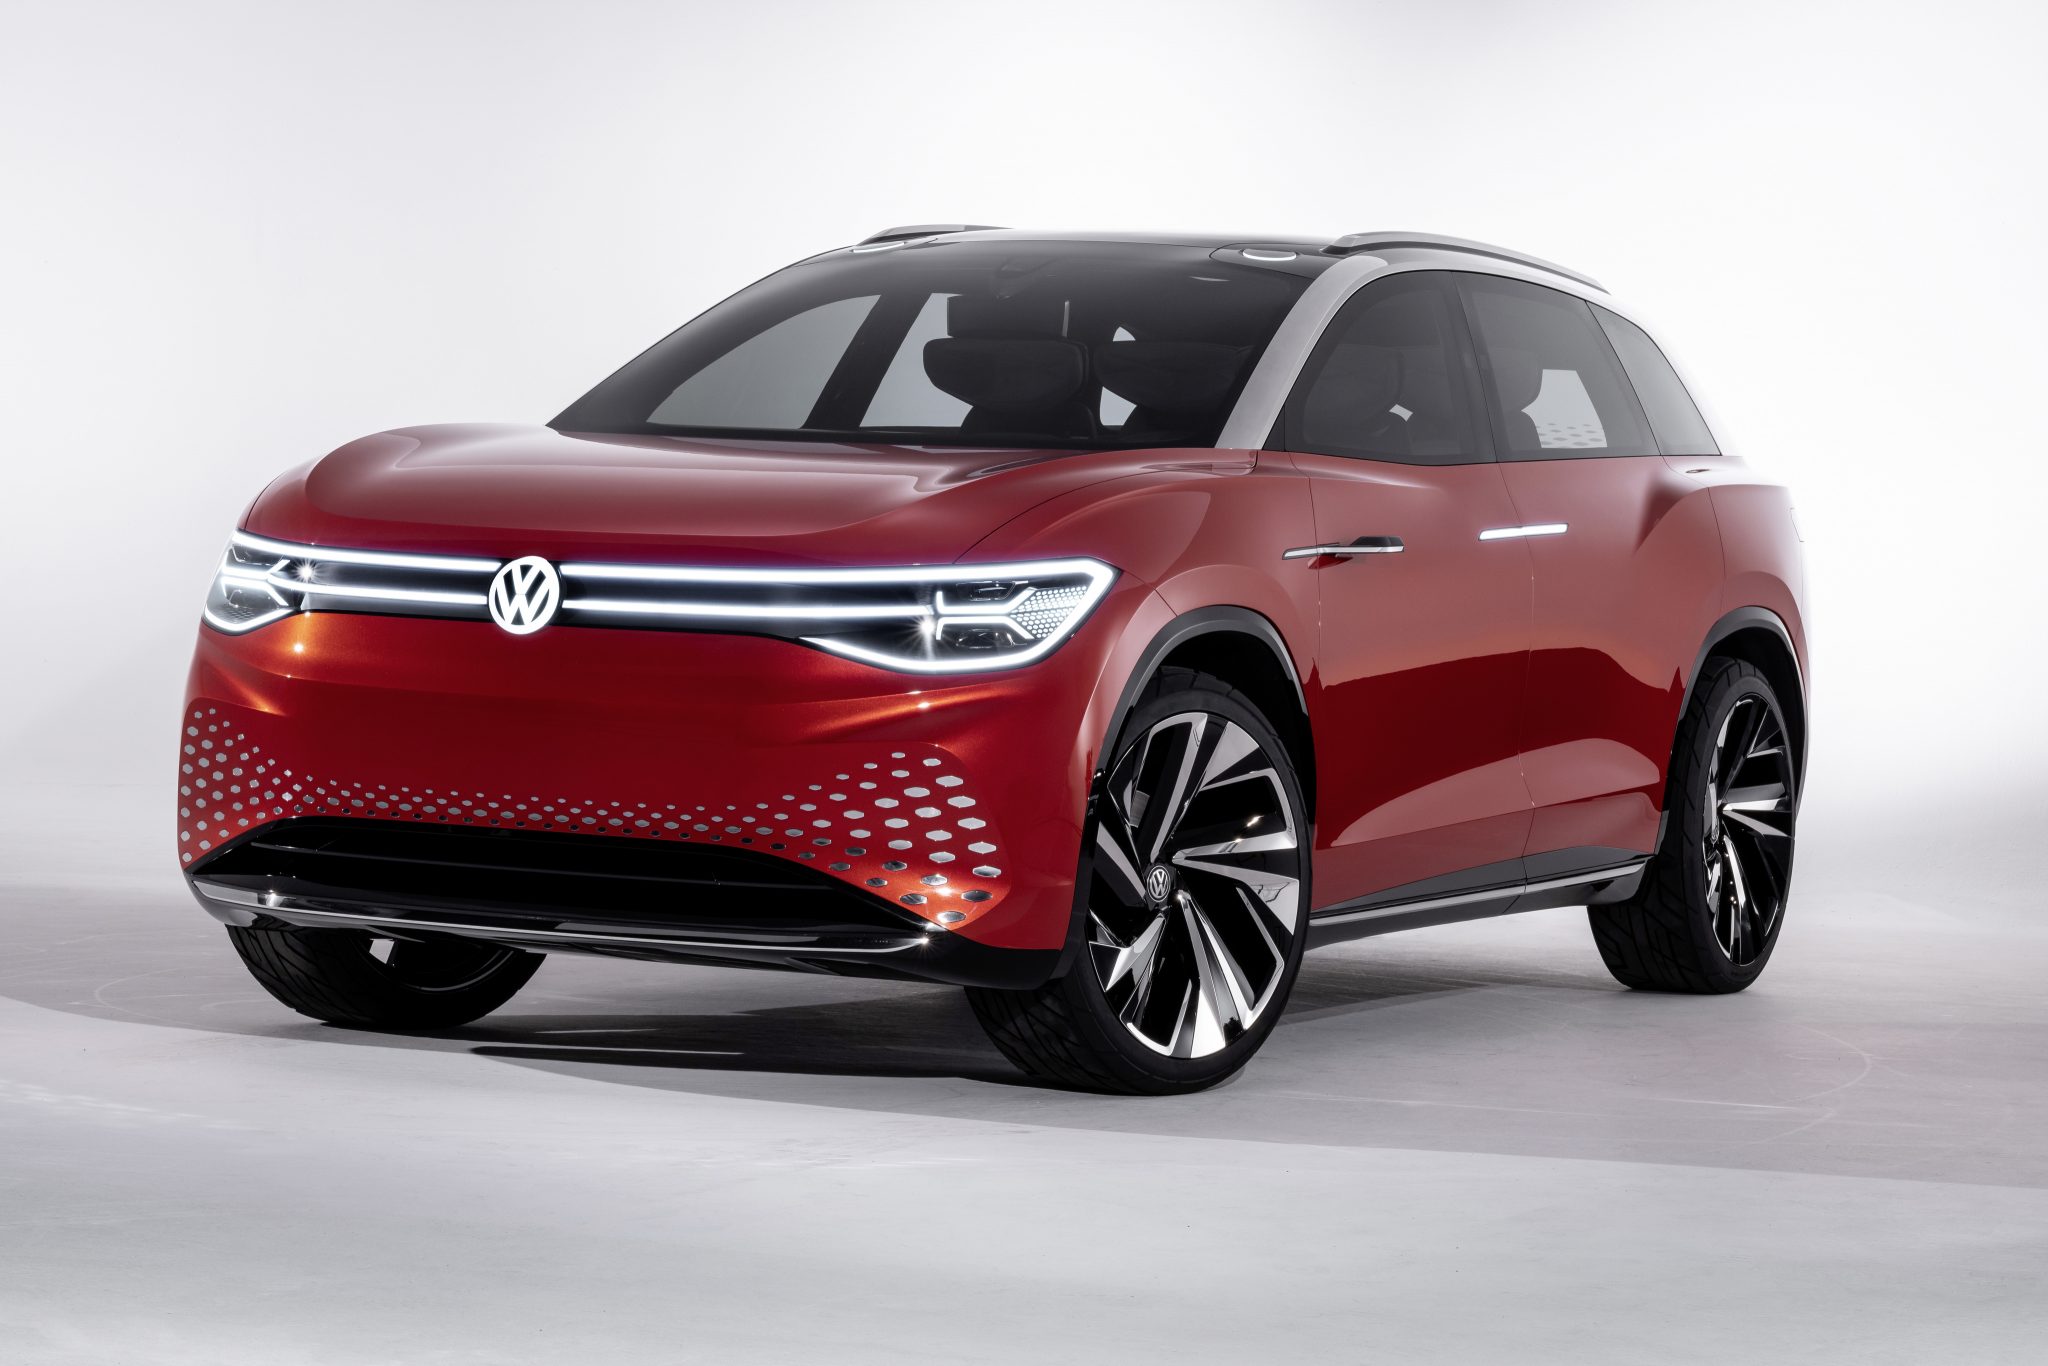 Volkswagen will release ID.6 EV in 2023 with 435mile range